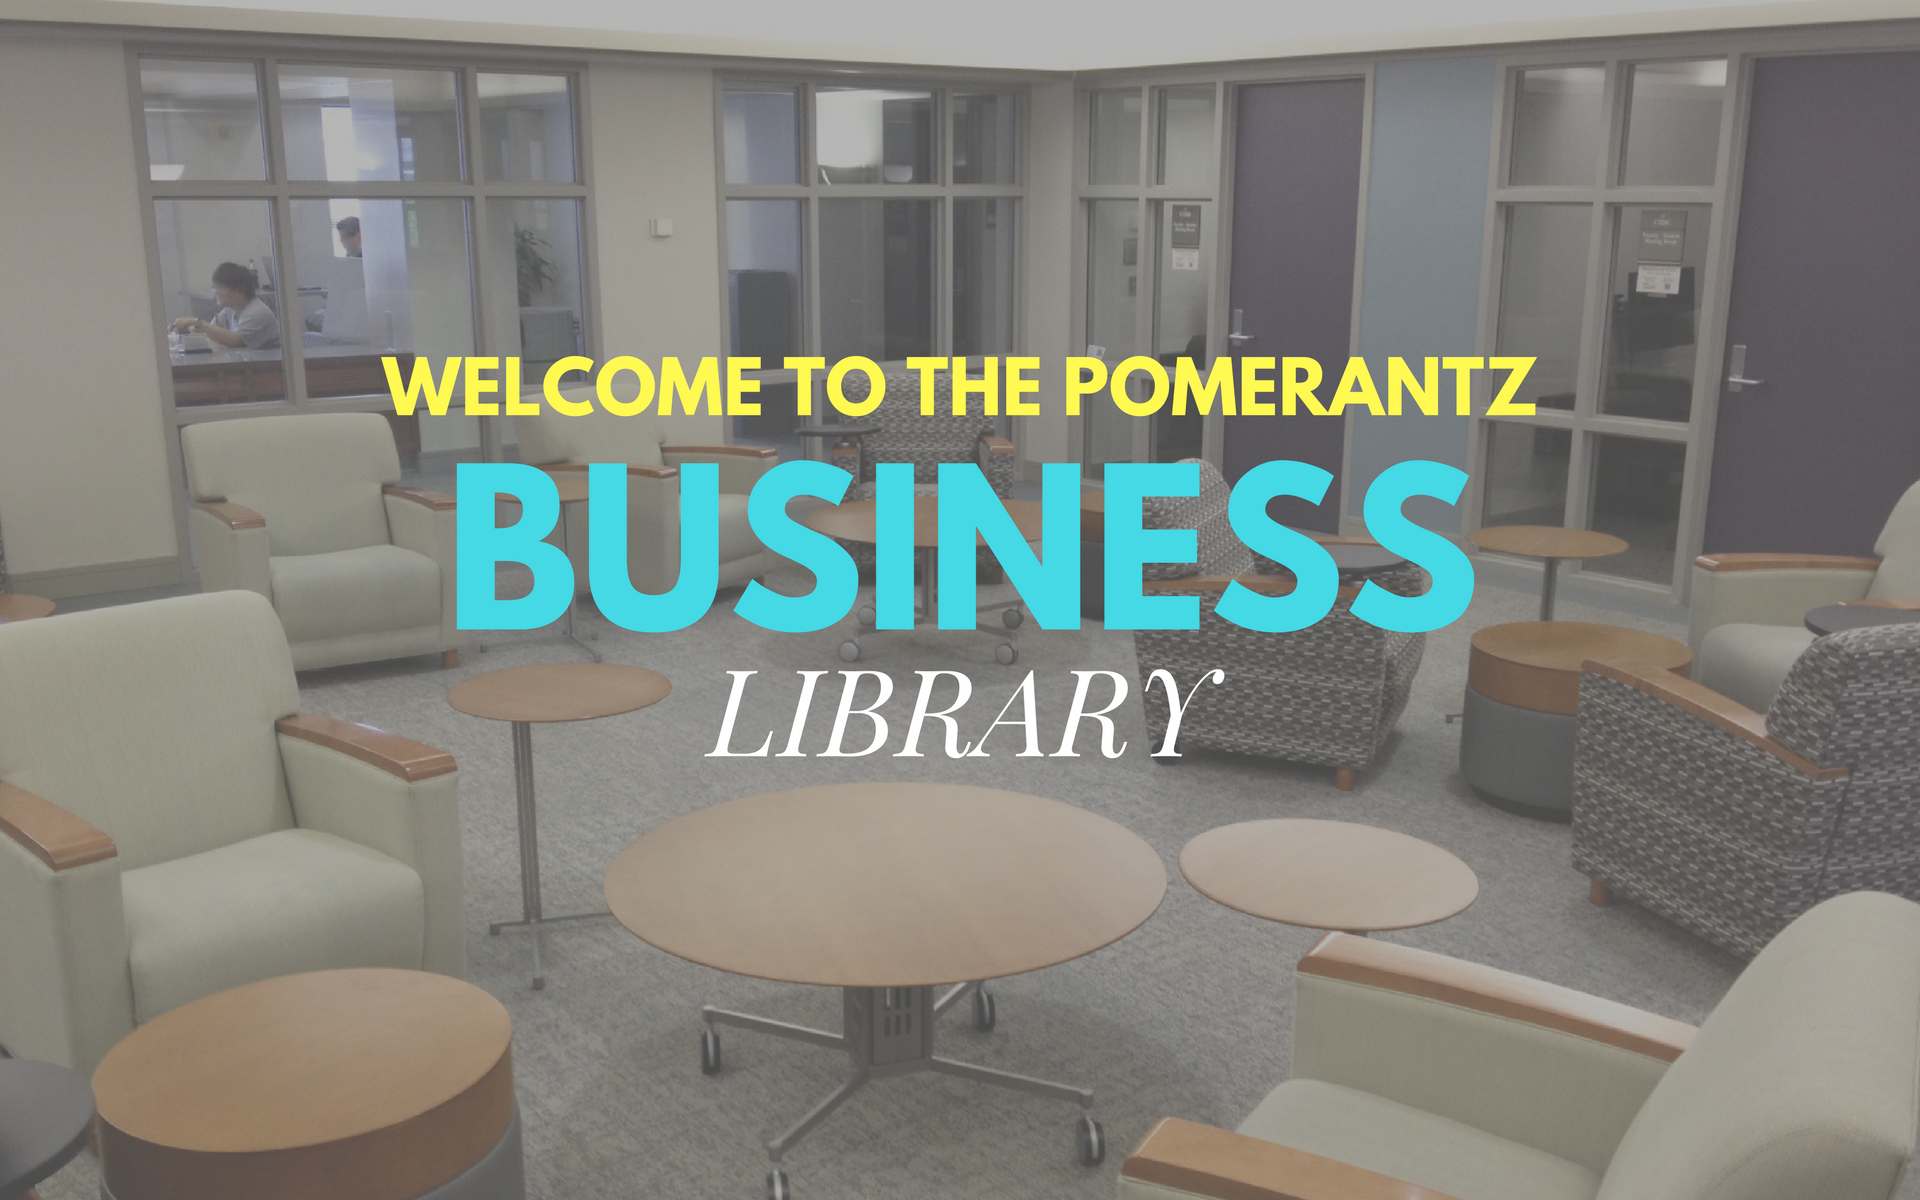 Welcome to the Pomerantz Business Library